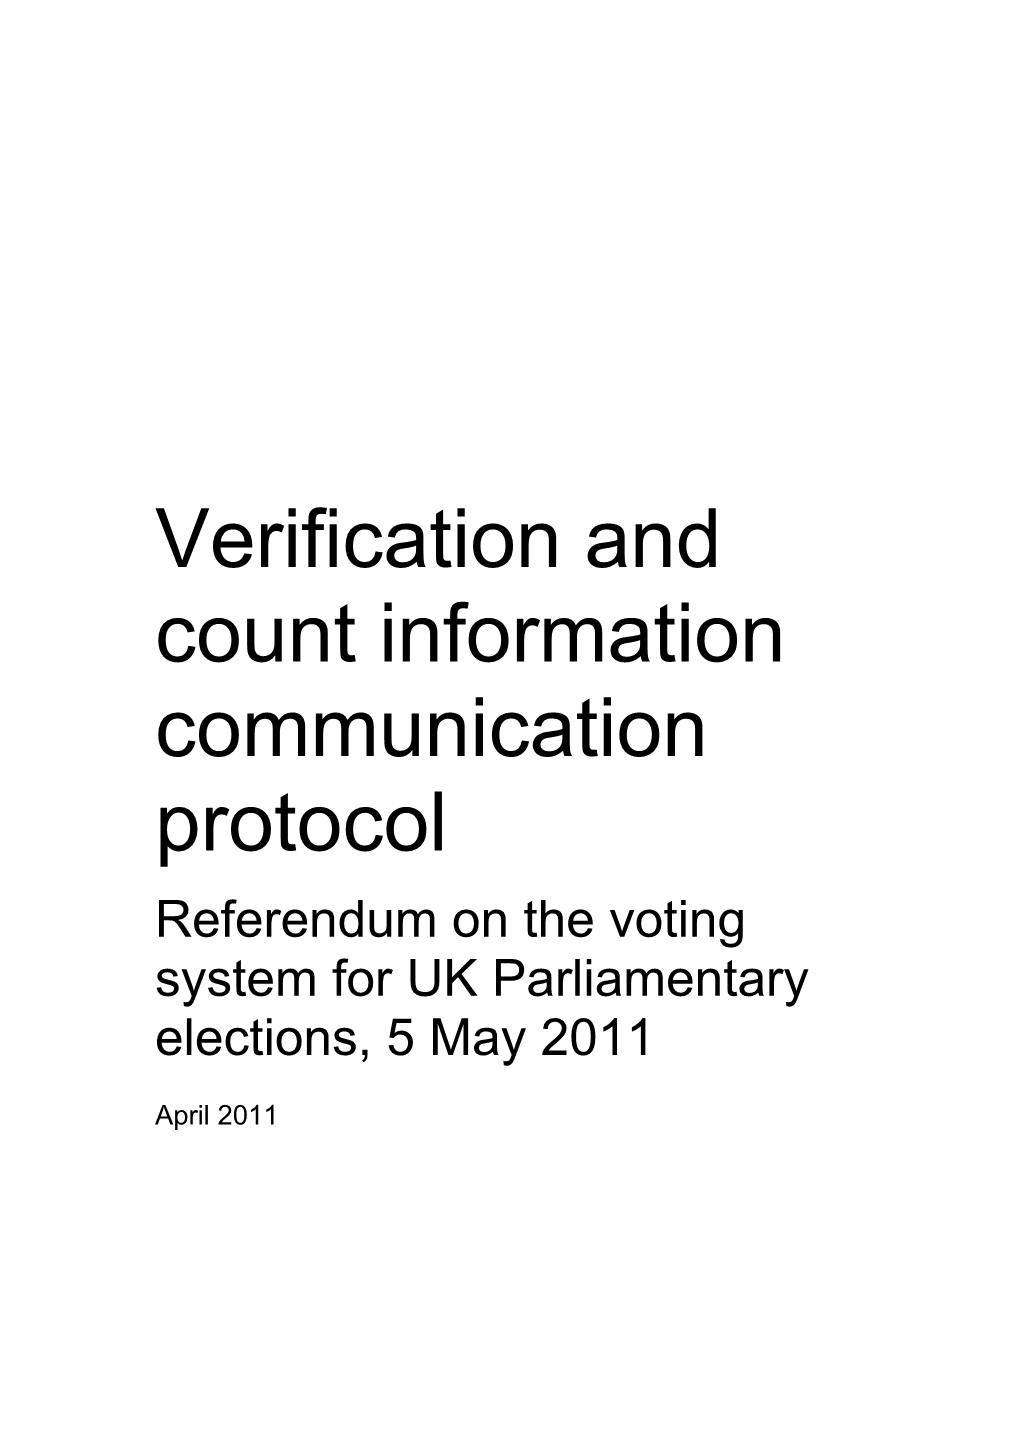 1.2This Protocol Is Aimed at Ensuring a Consistent and Transparent Approach to the Communication